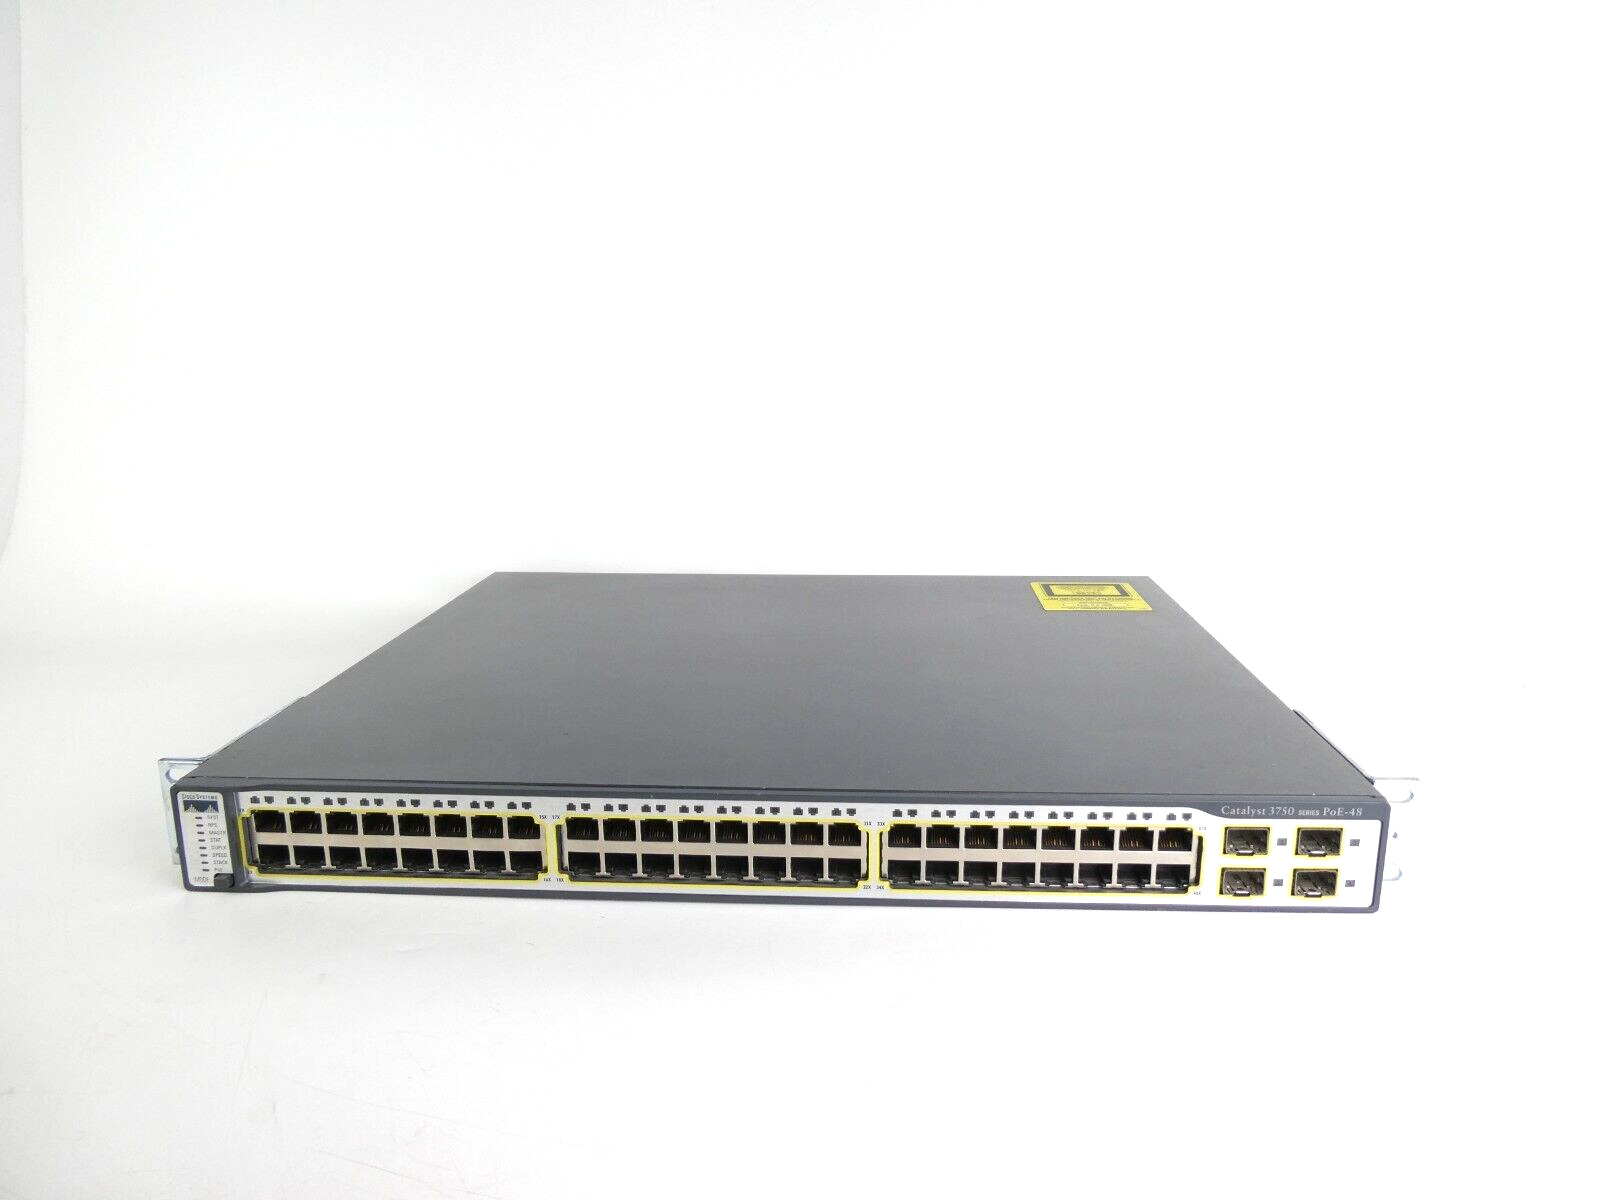 Cisco Catalyst 3750 WS-C3750-48PS-S v06 48-Port PoE Fast Ethernet Network Switch